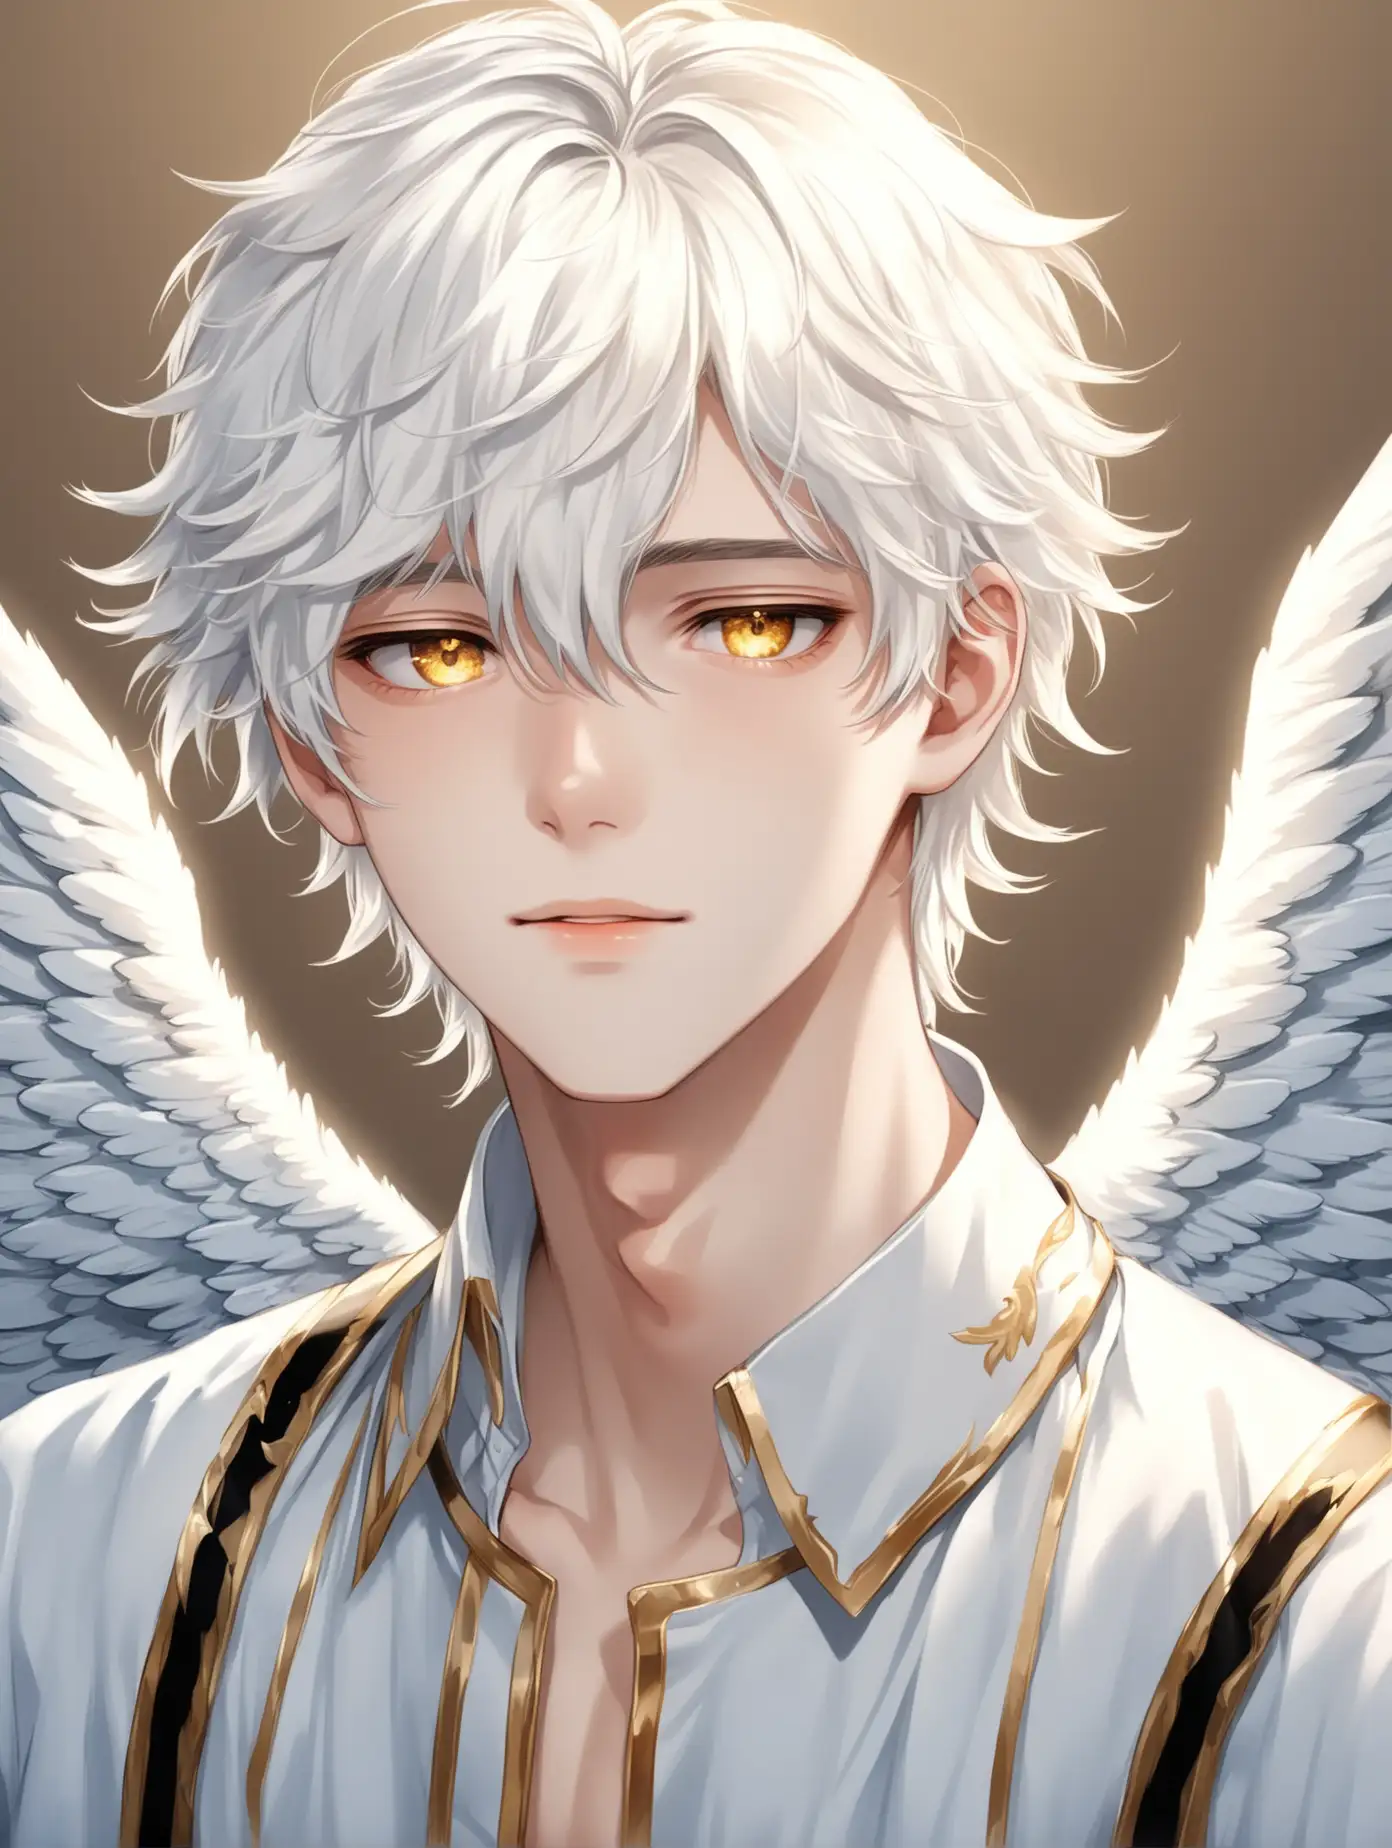 Youthful-Angelic-Appearance-Beautiful-19YearOld-Boy-with-White-Hair-and-Golden-Eyes